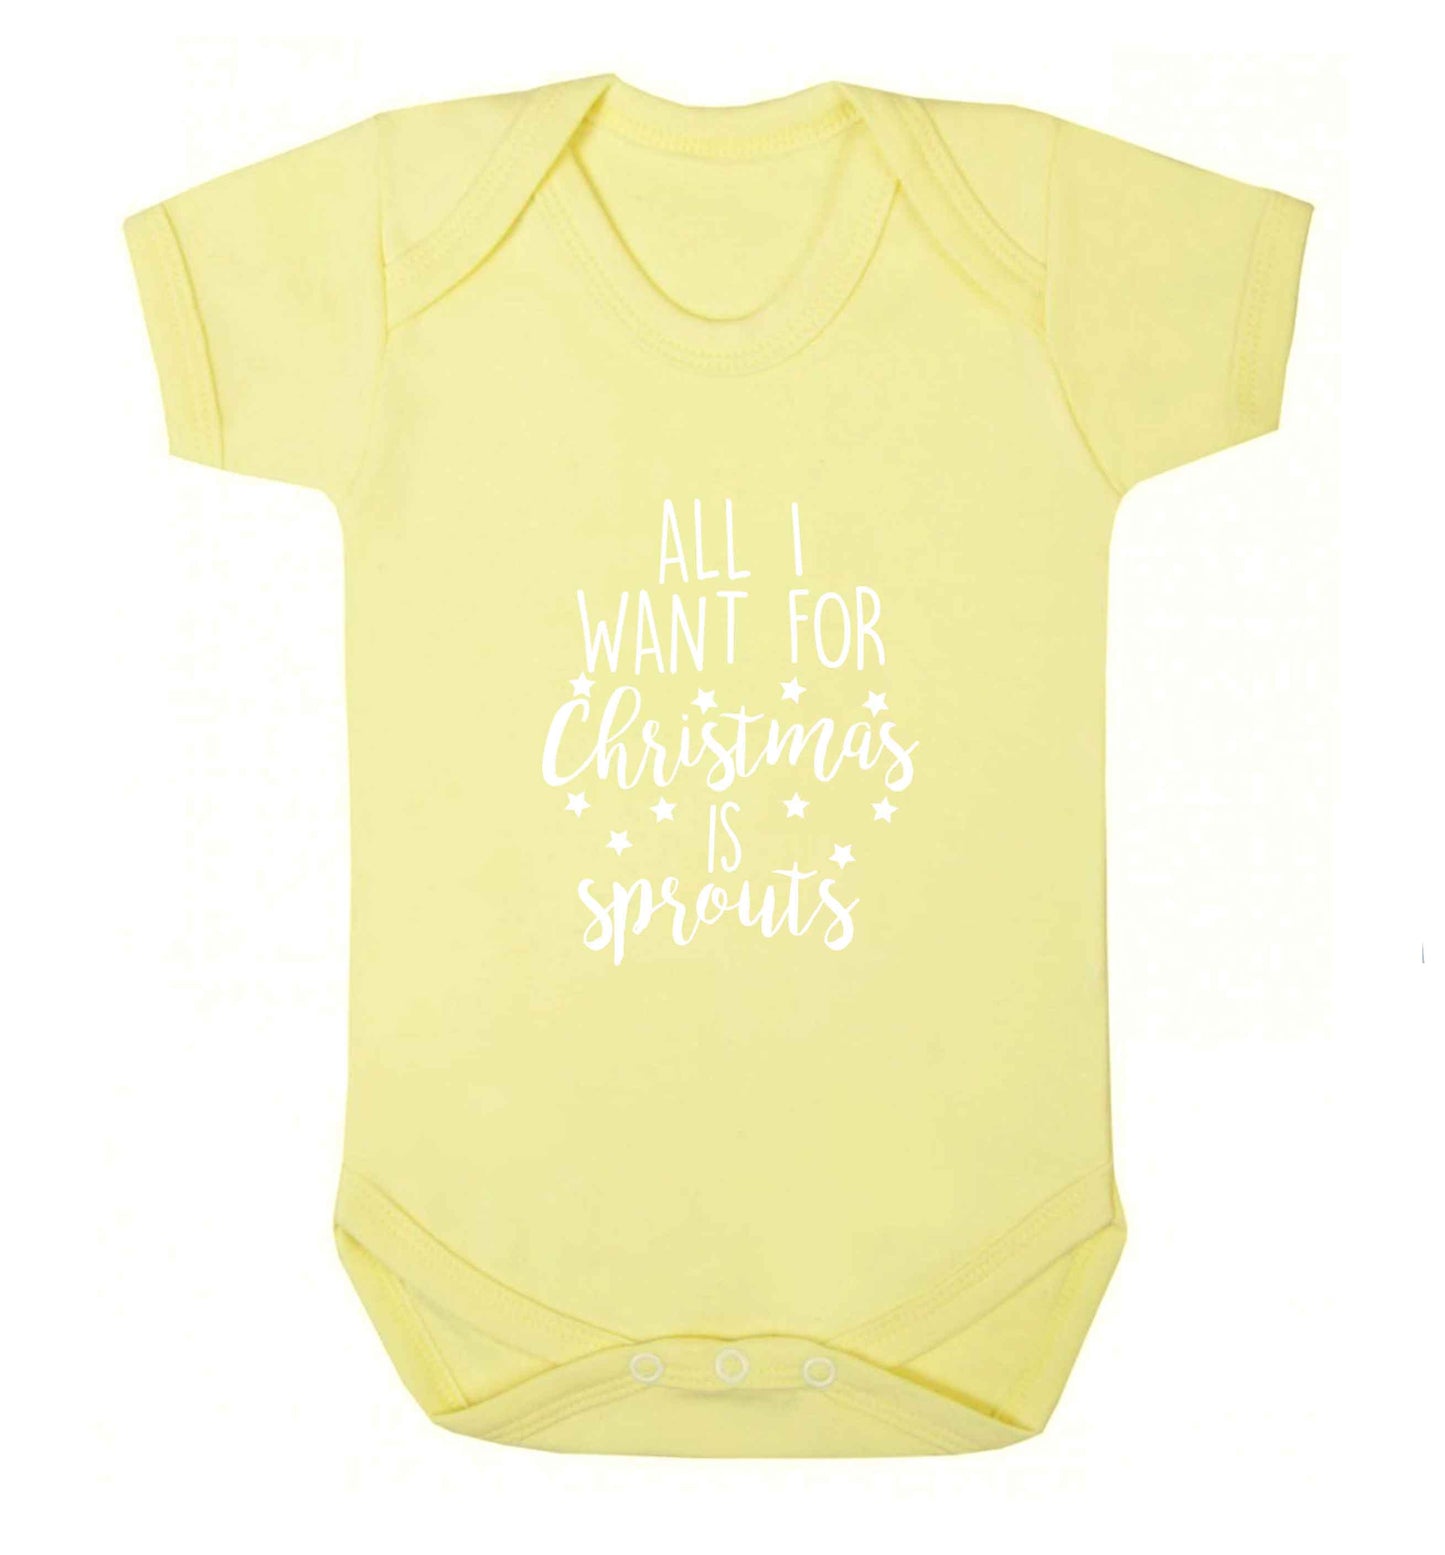 All I want for Christmas is sprouts baby vest pale yellow 18-24 months